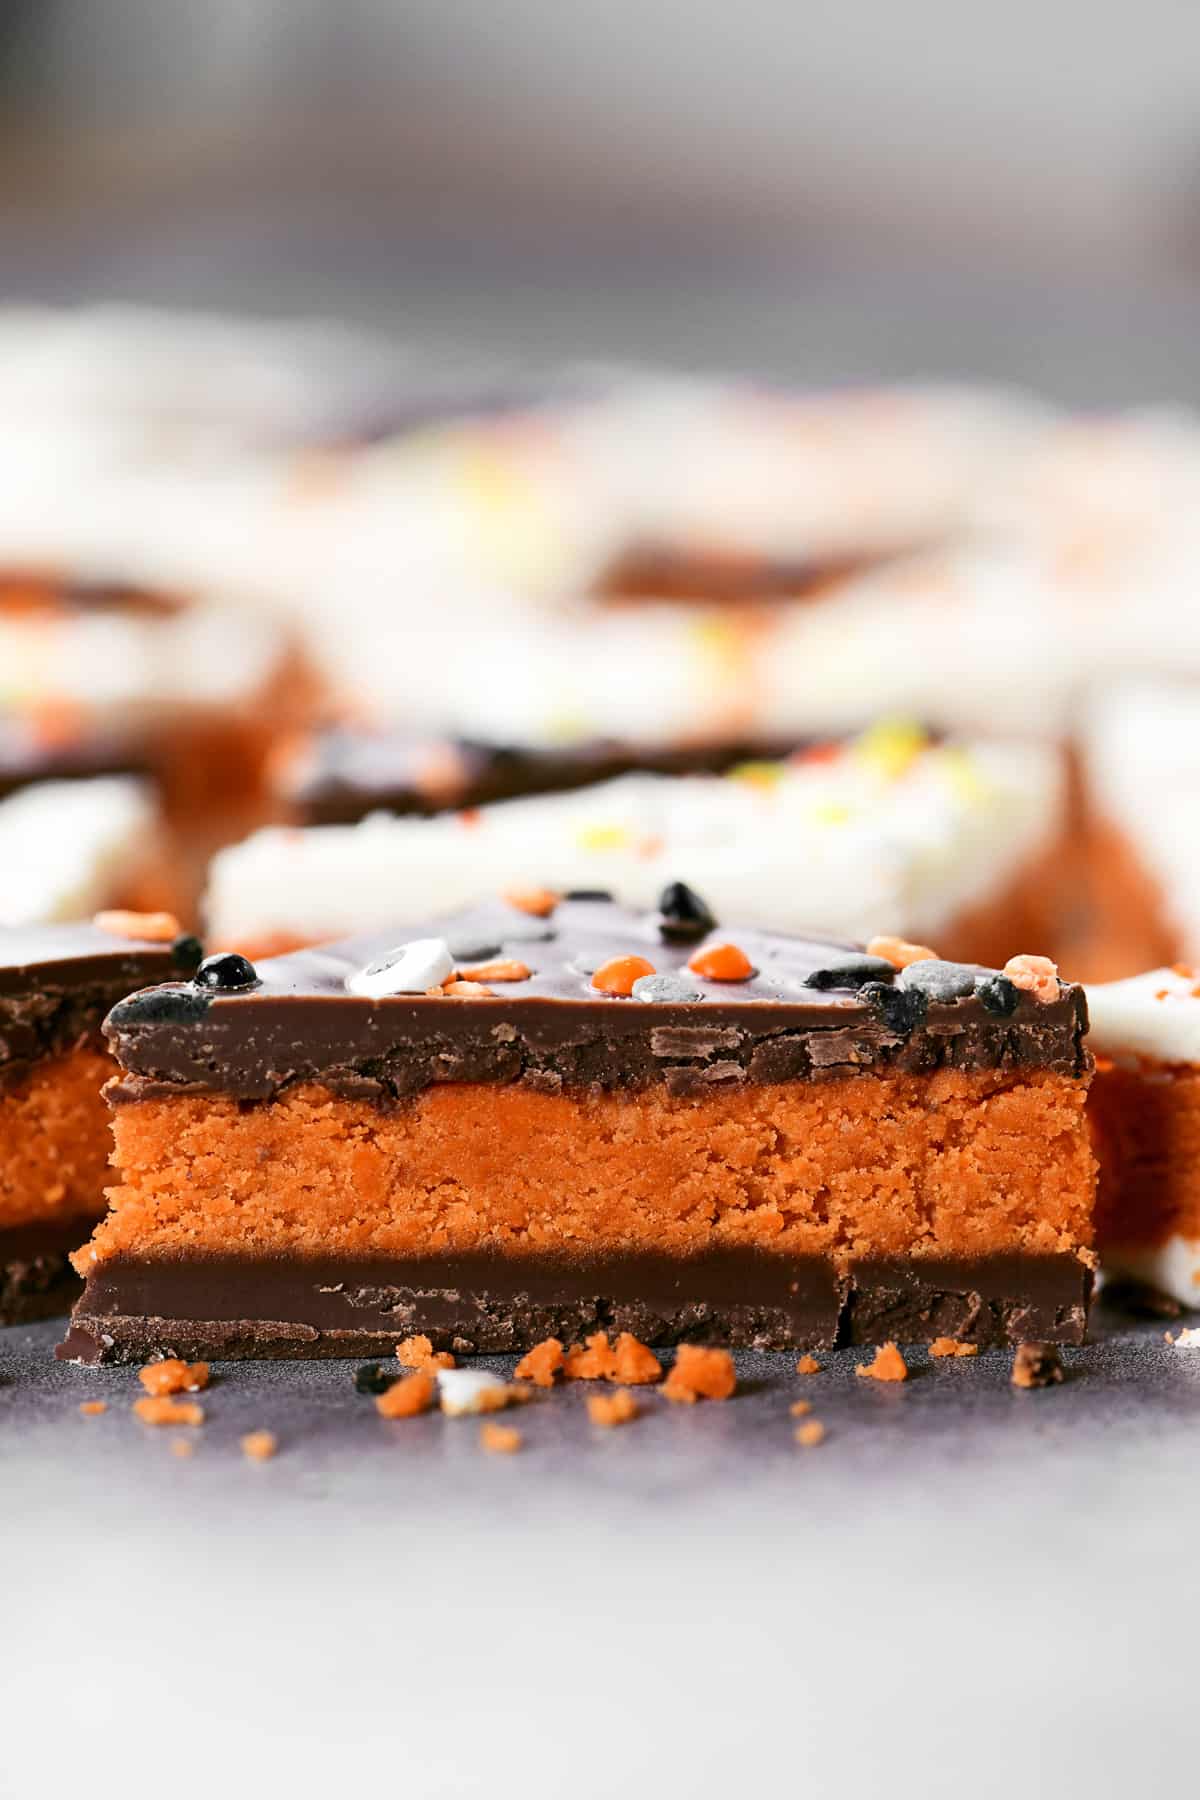 Homemade butterfinger with candy corn.